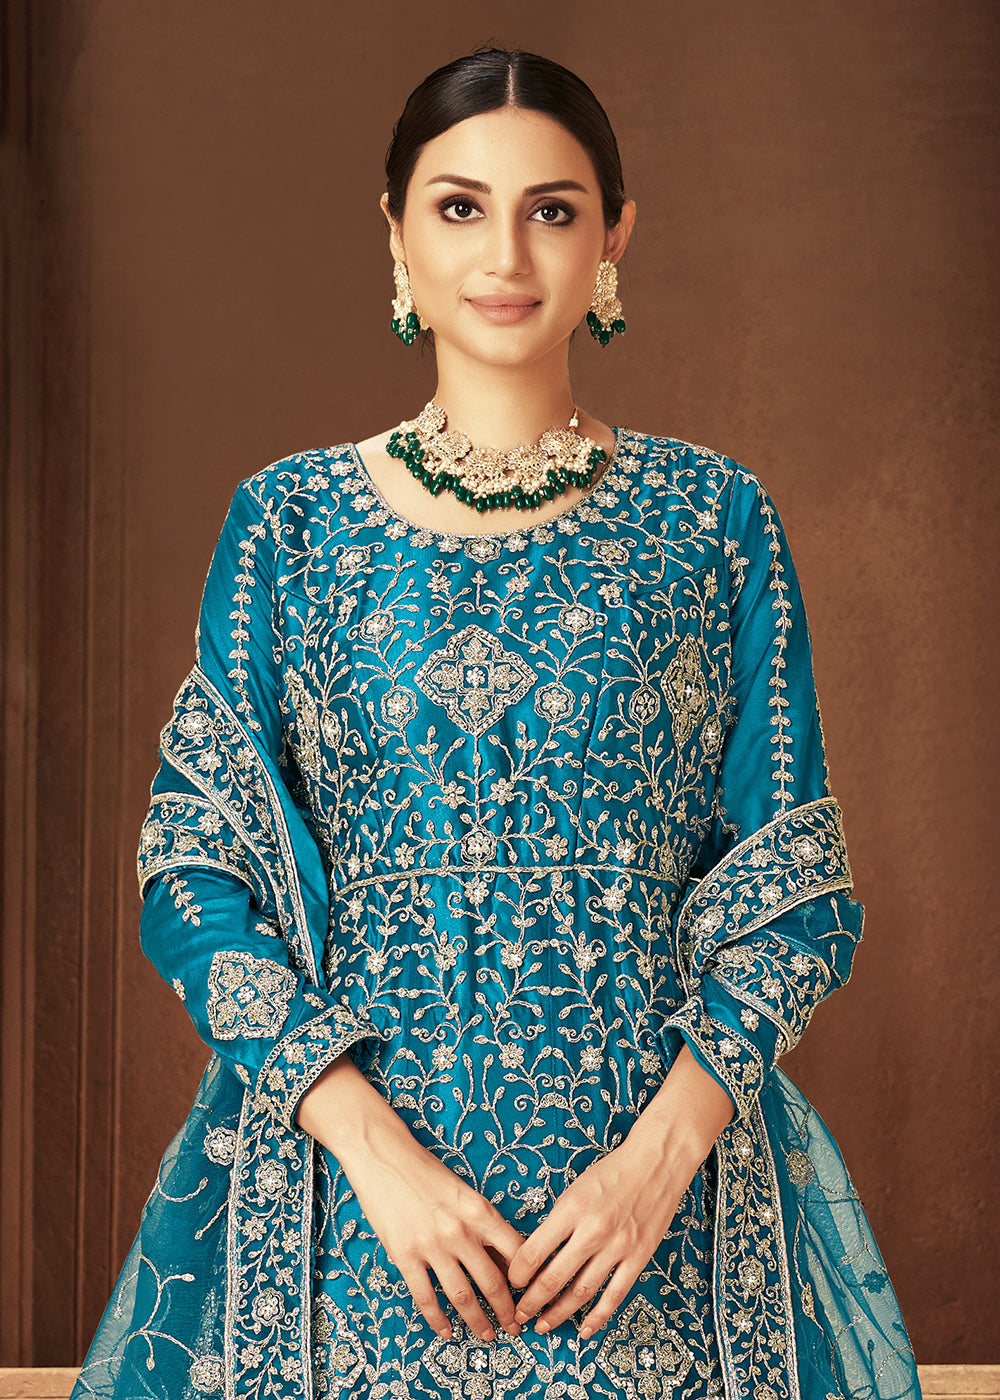 Buy Now Teal Zarkan Diamond Embroidered Bridal Anarkali Suit Online in Canada at Empress Clothing.